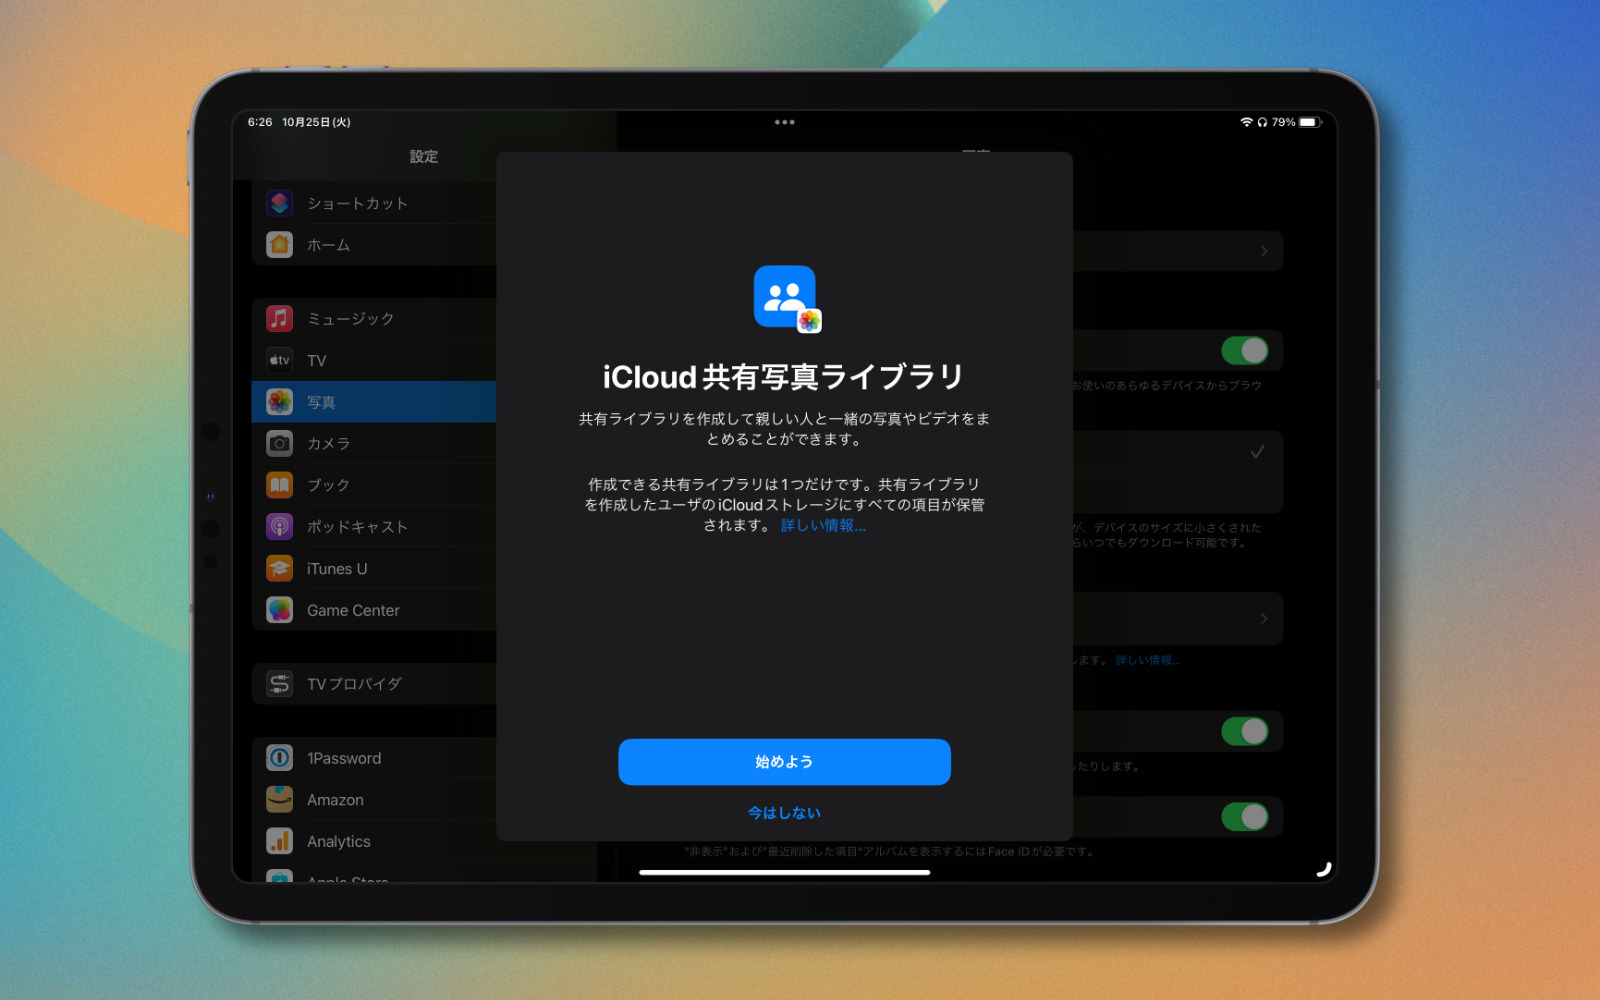 ipados16-new-features-icloud-shared-library.jpg